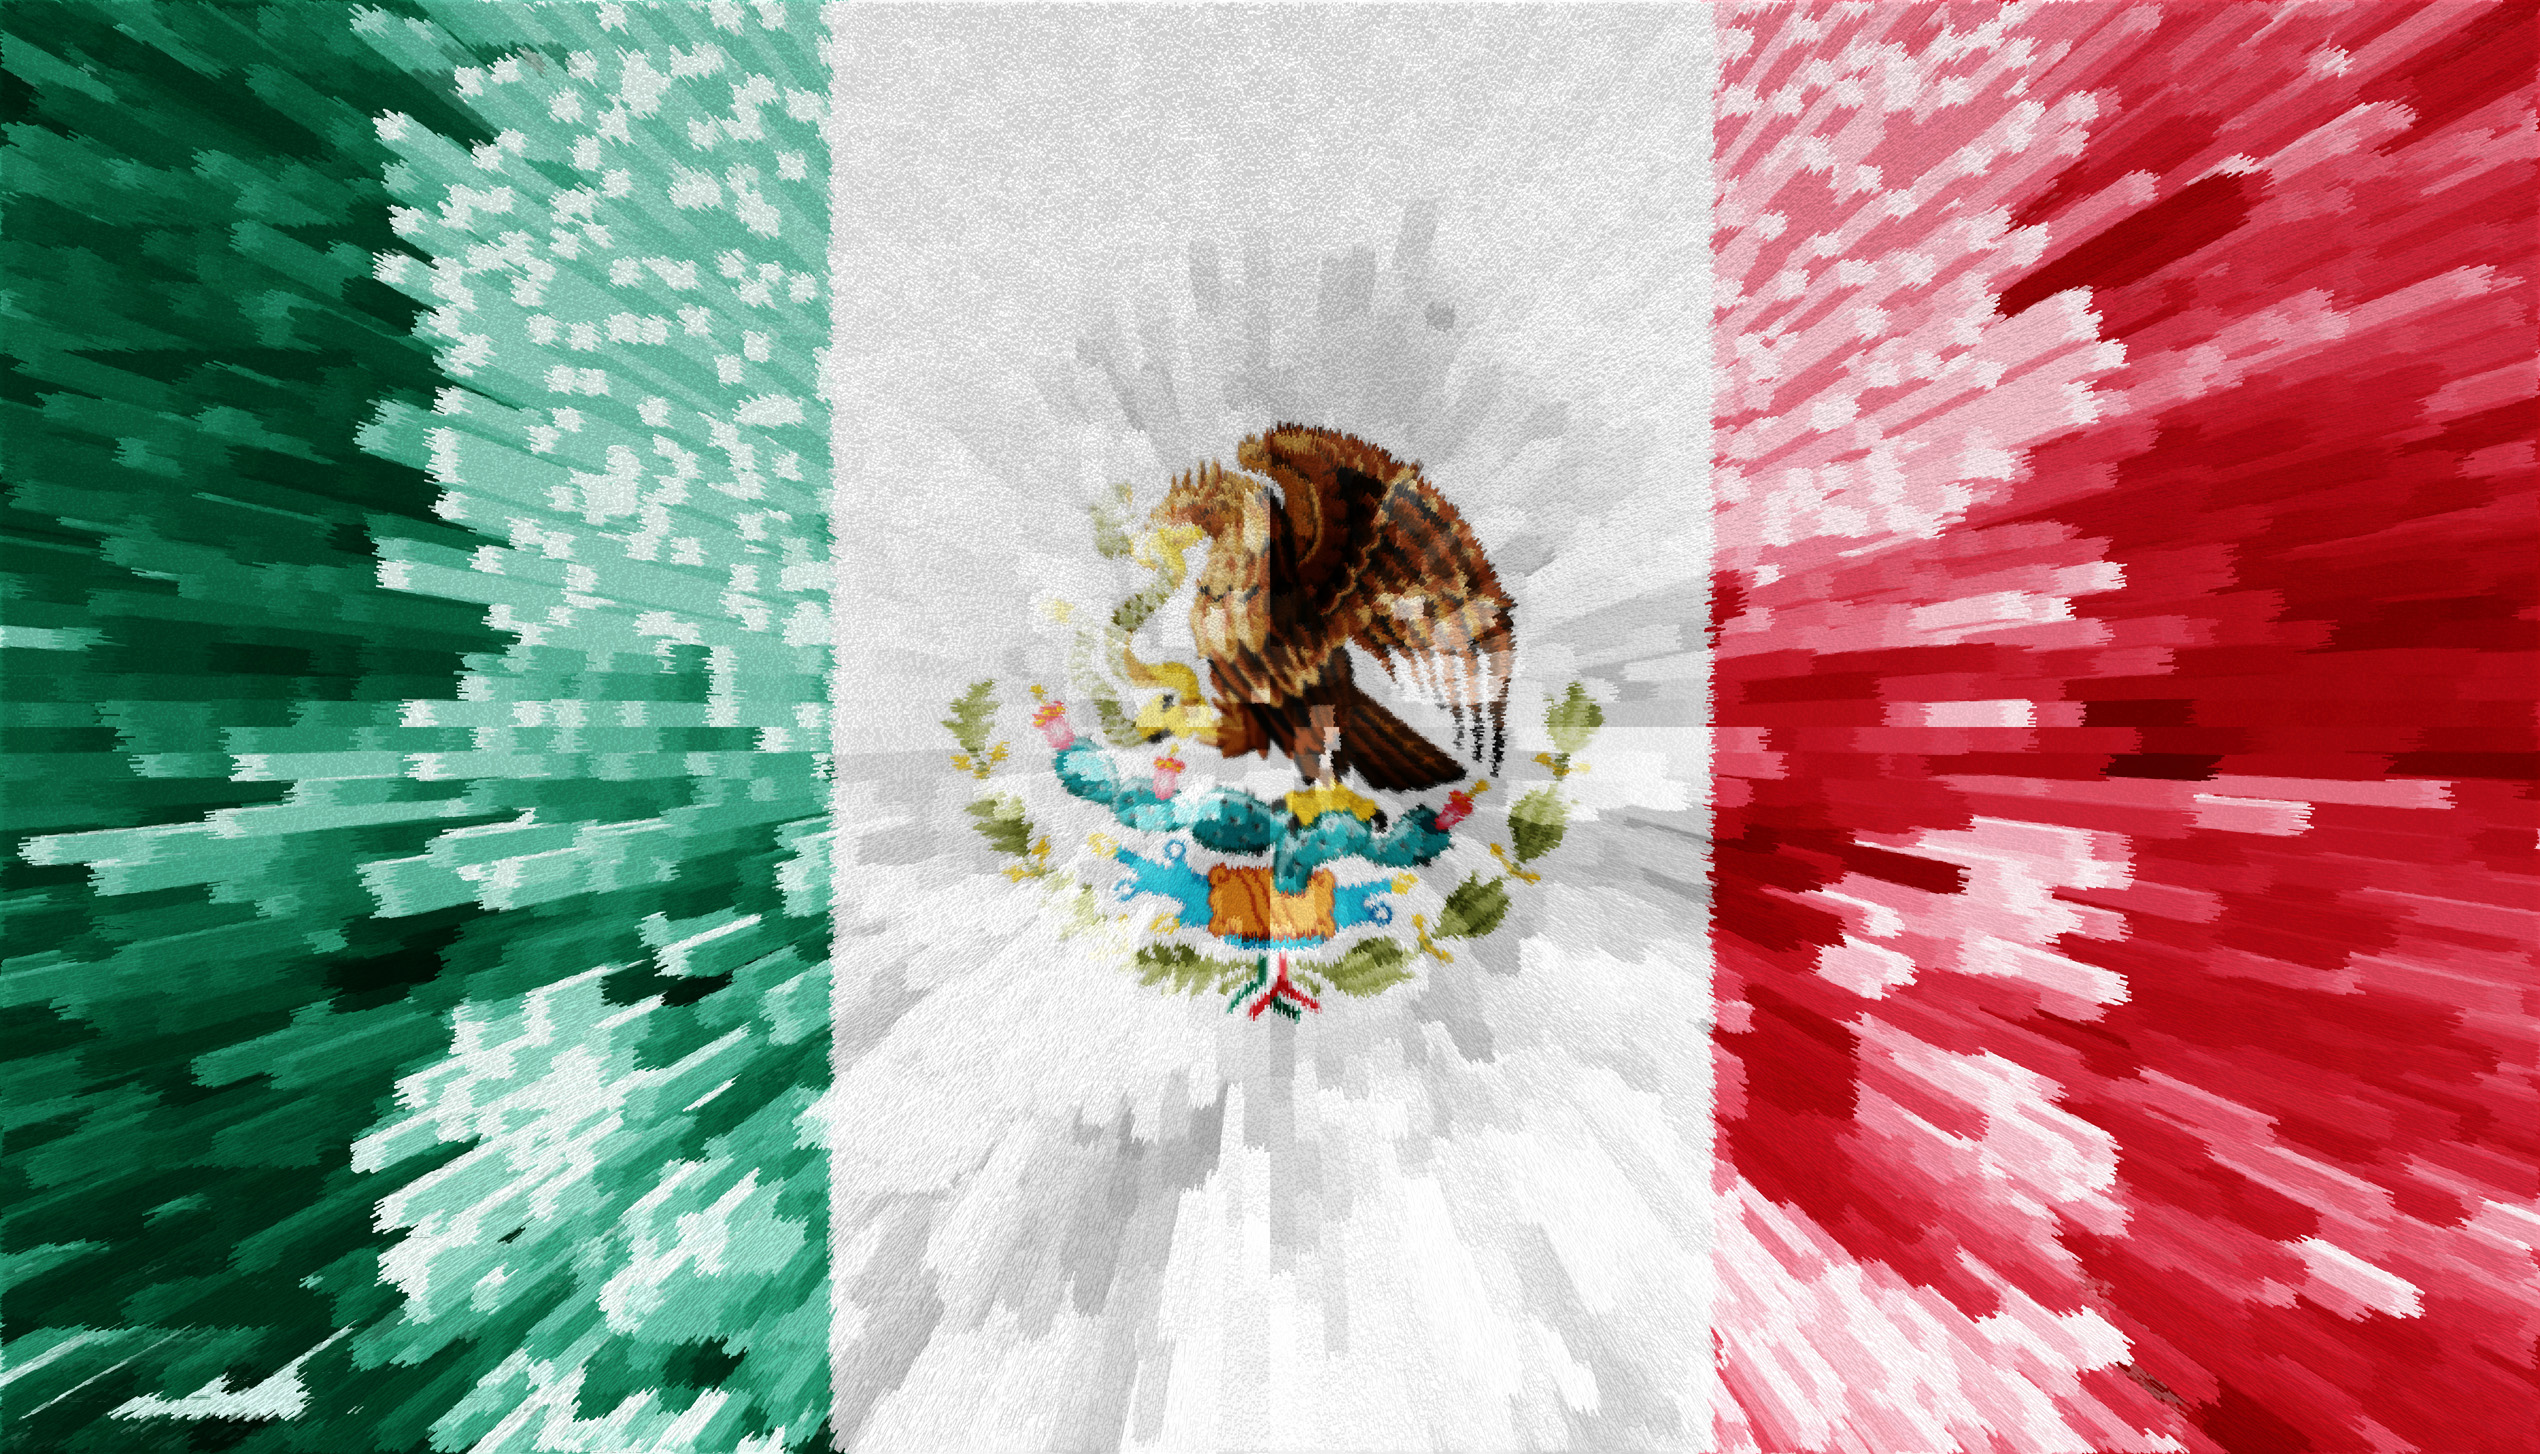 Awesome Mexico wallpaper for iPhone, iPad